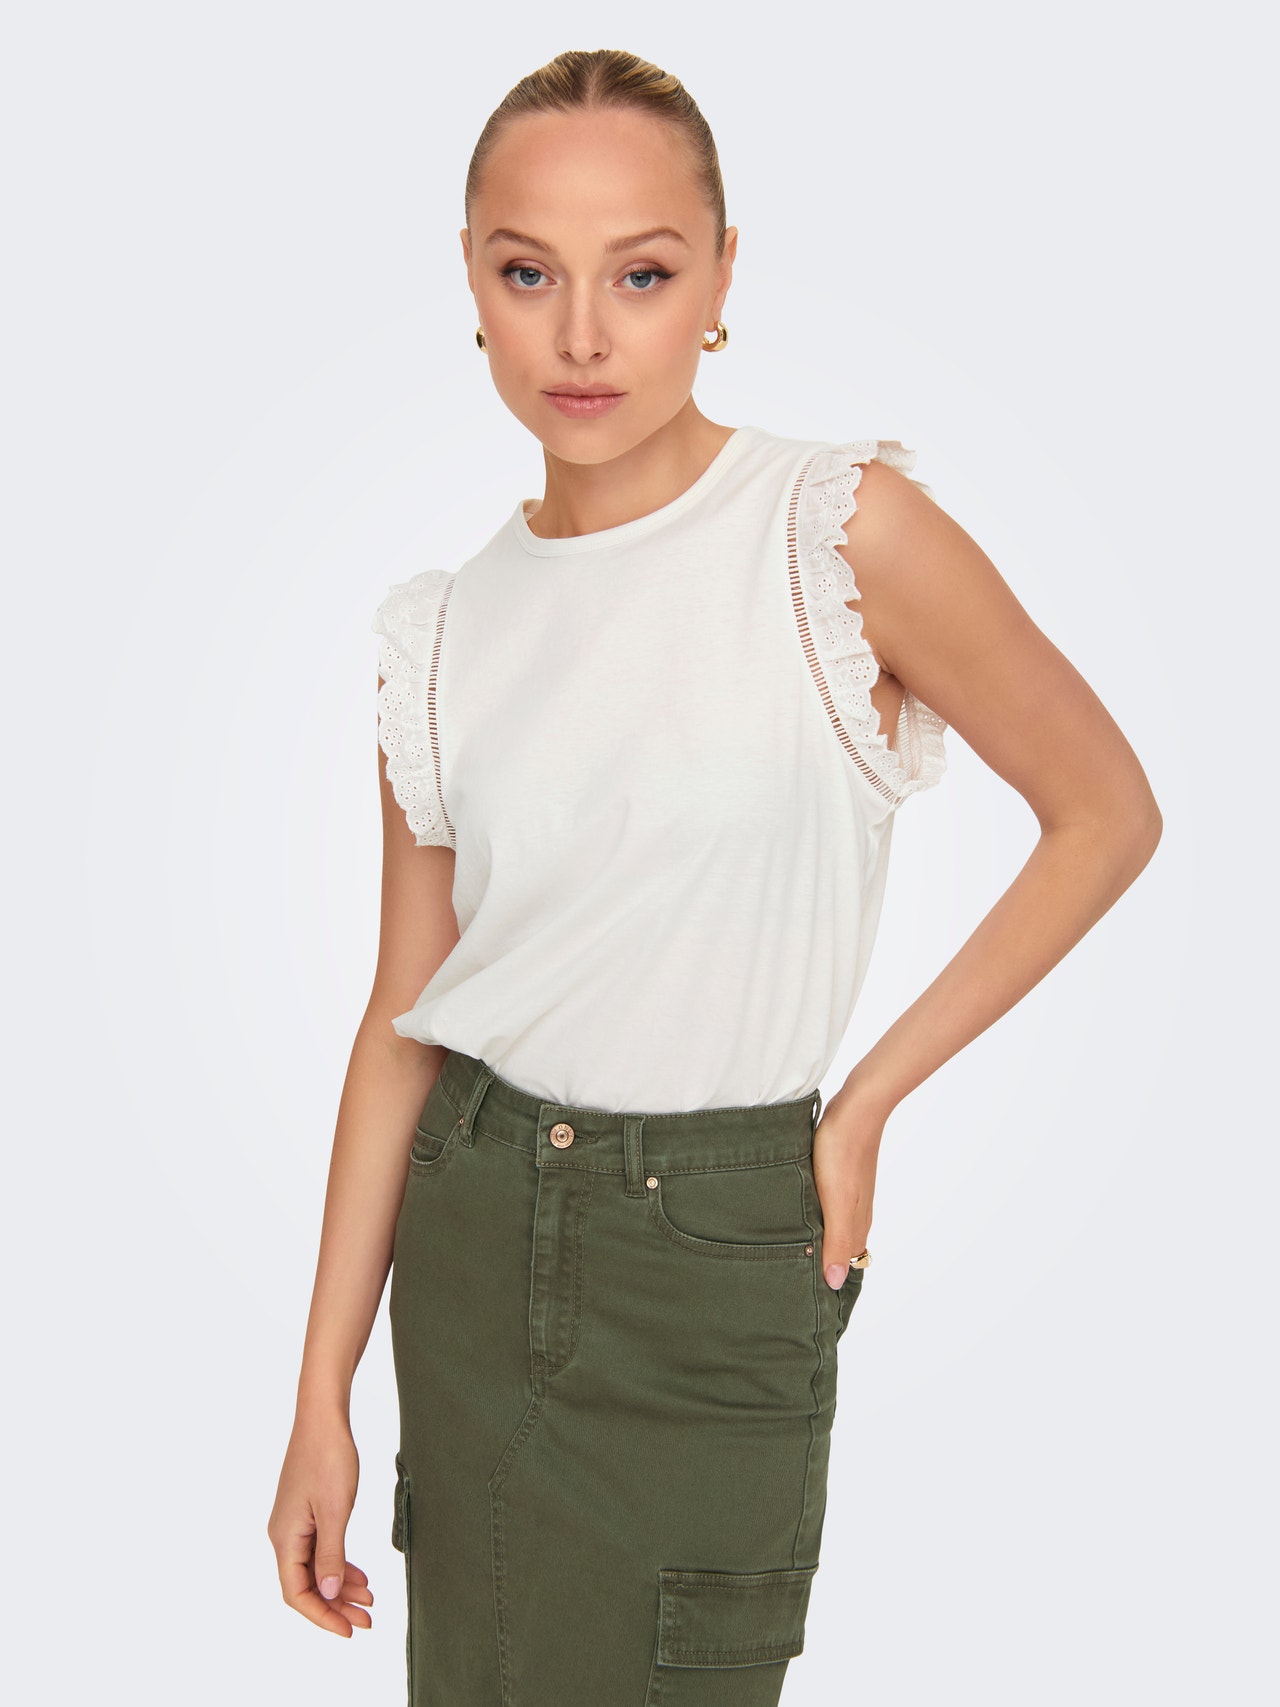 ONLY Top With Ruffle Sleeves -Cloud Dancer - 15289579